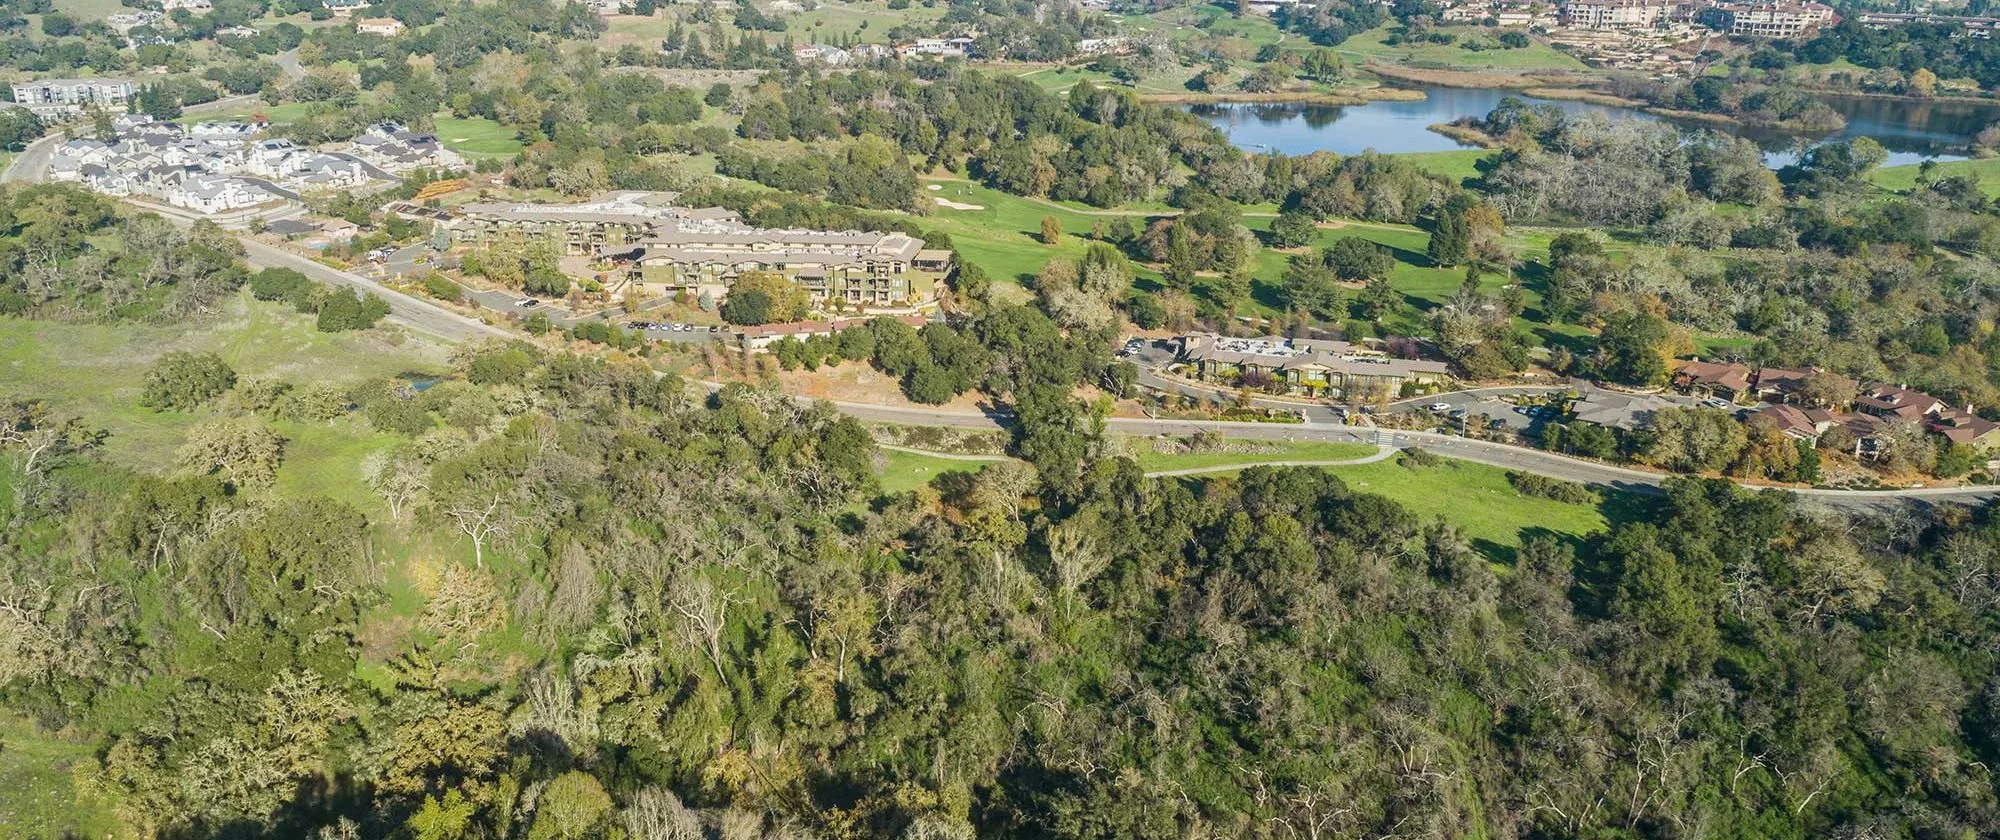 The Terraces Aerial view of building and golf course